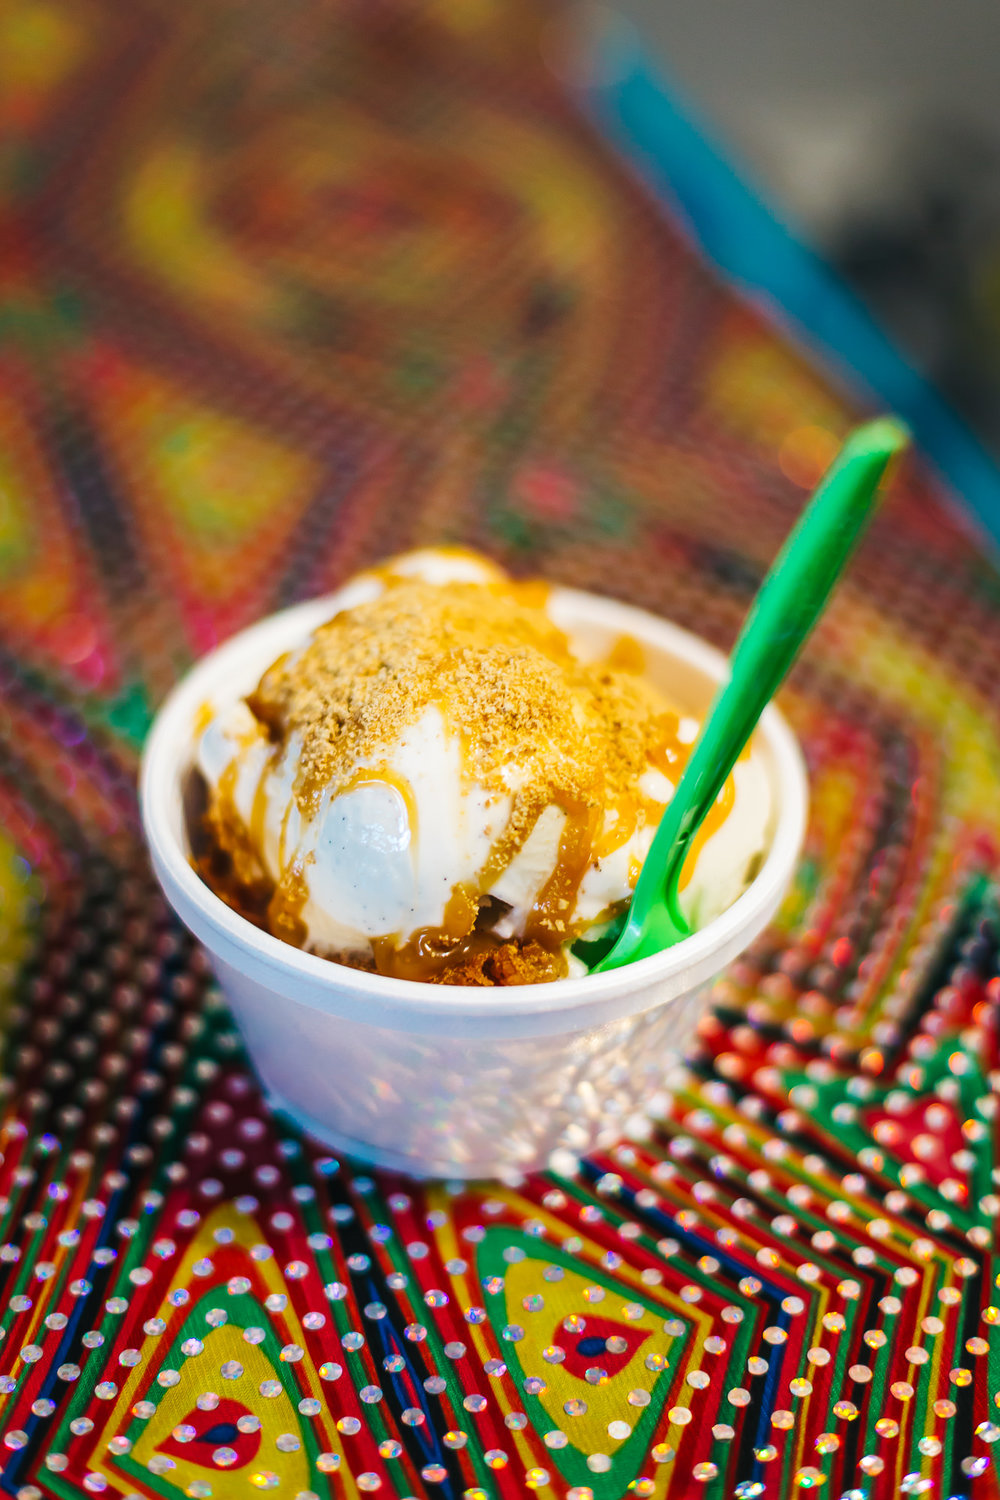 5 Great Icy Treats in Tampa to Keep You Cool This Summer